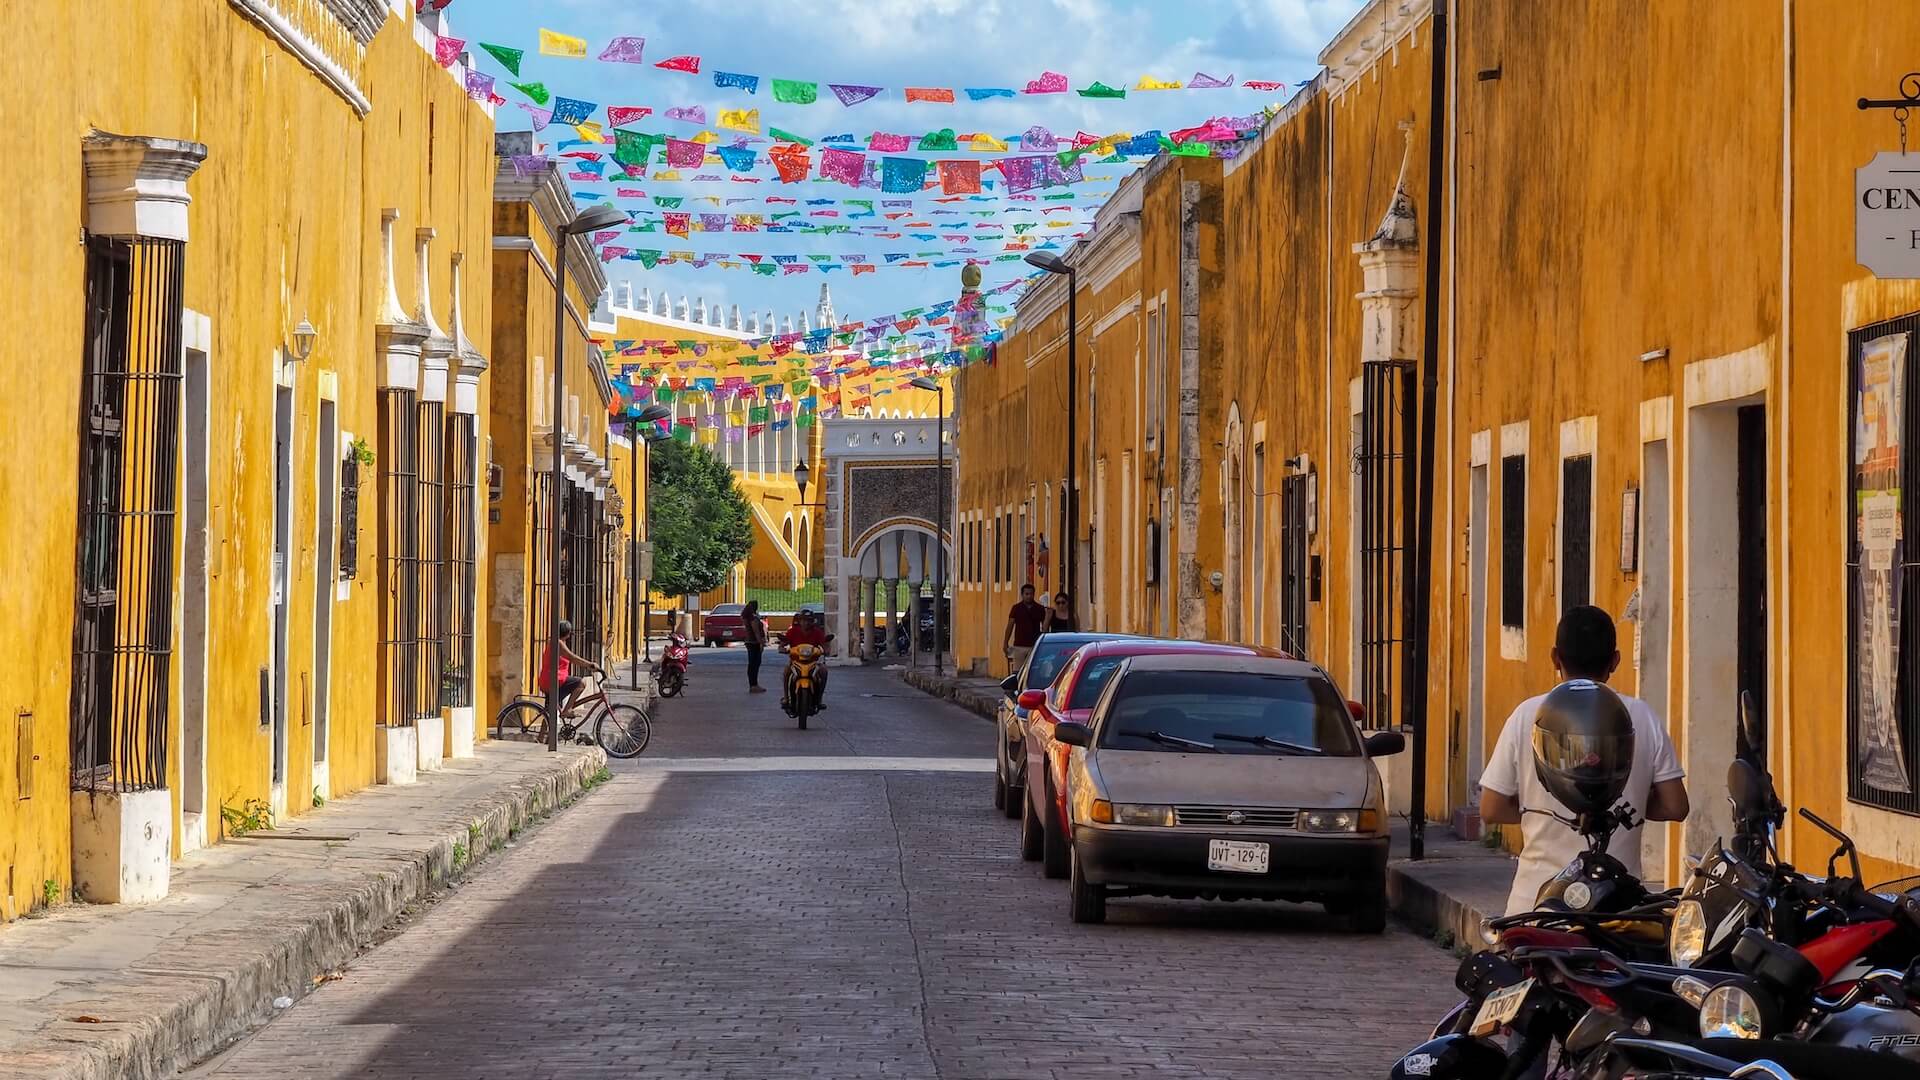 A street scene in Izamal showing its iconic yellow buildings on either side